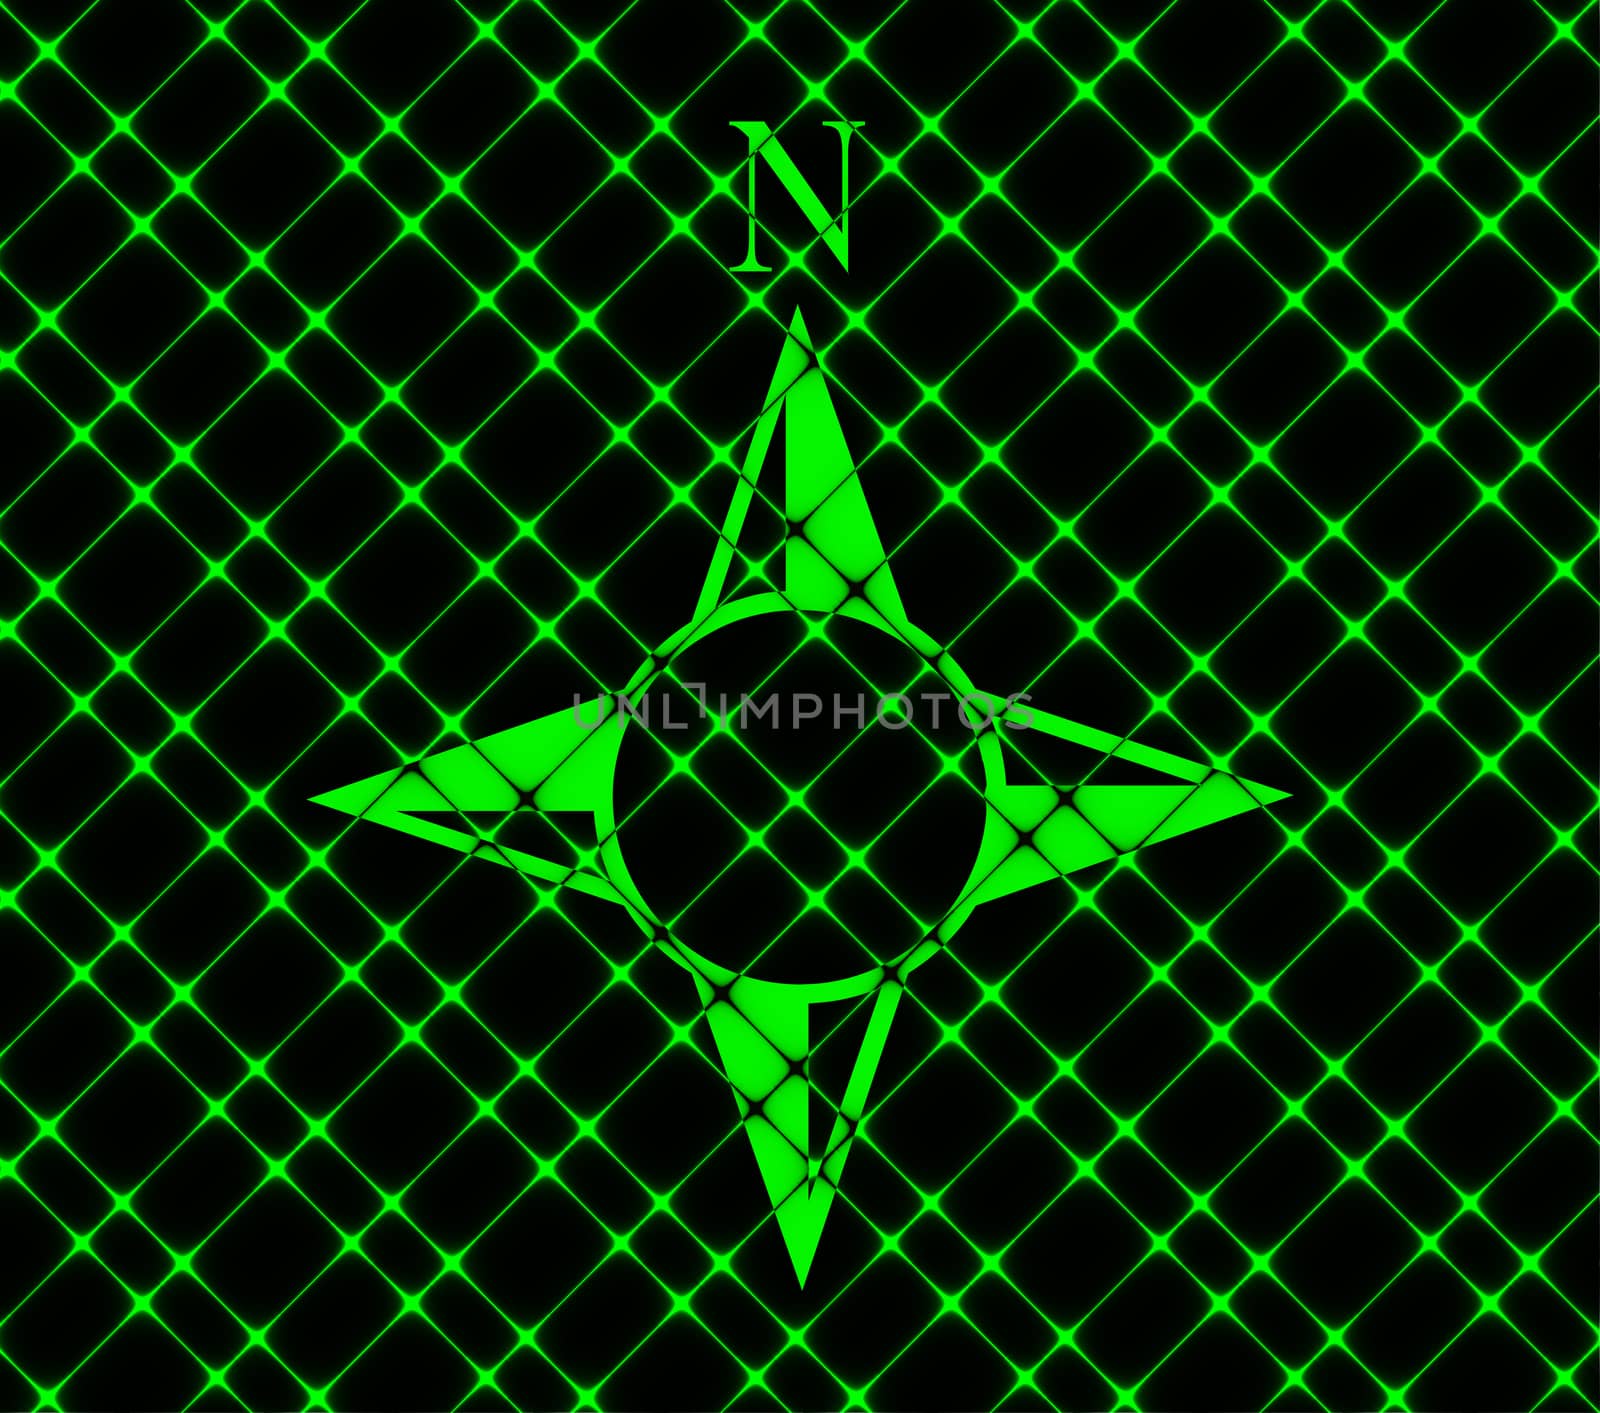 Compass icon. Flat with abstract background.